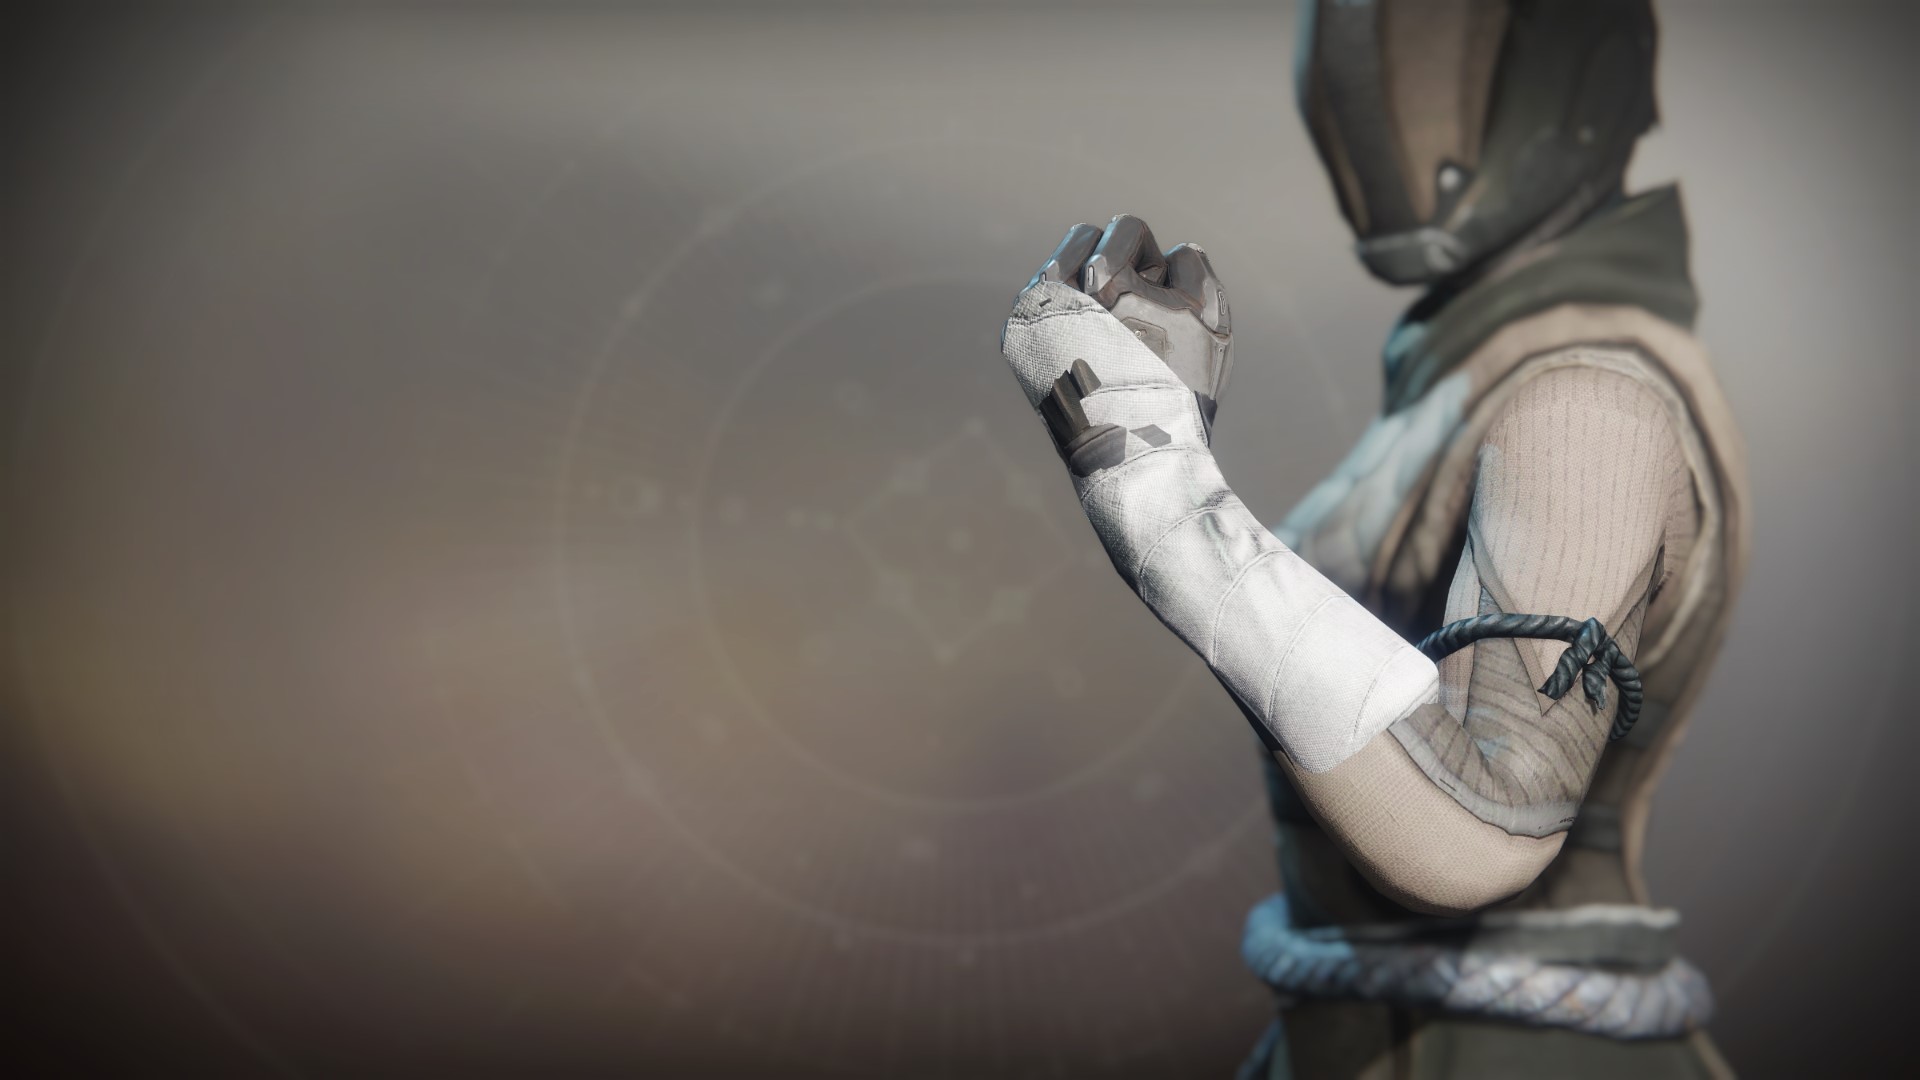 An in-game render of the Competitive Spirit Gloves.